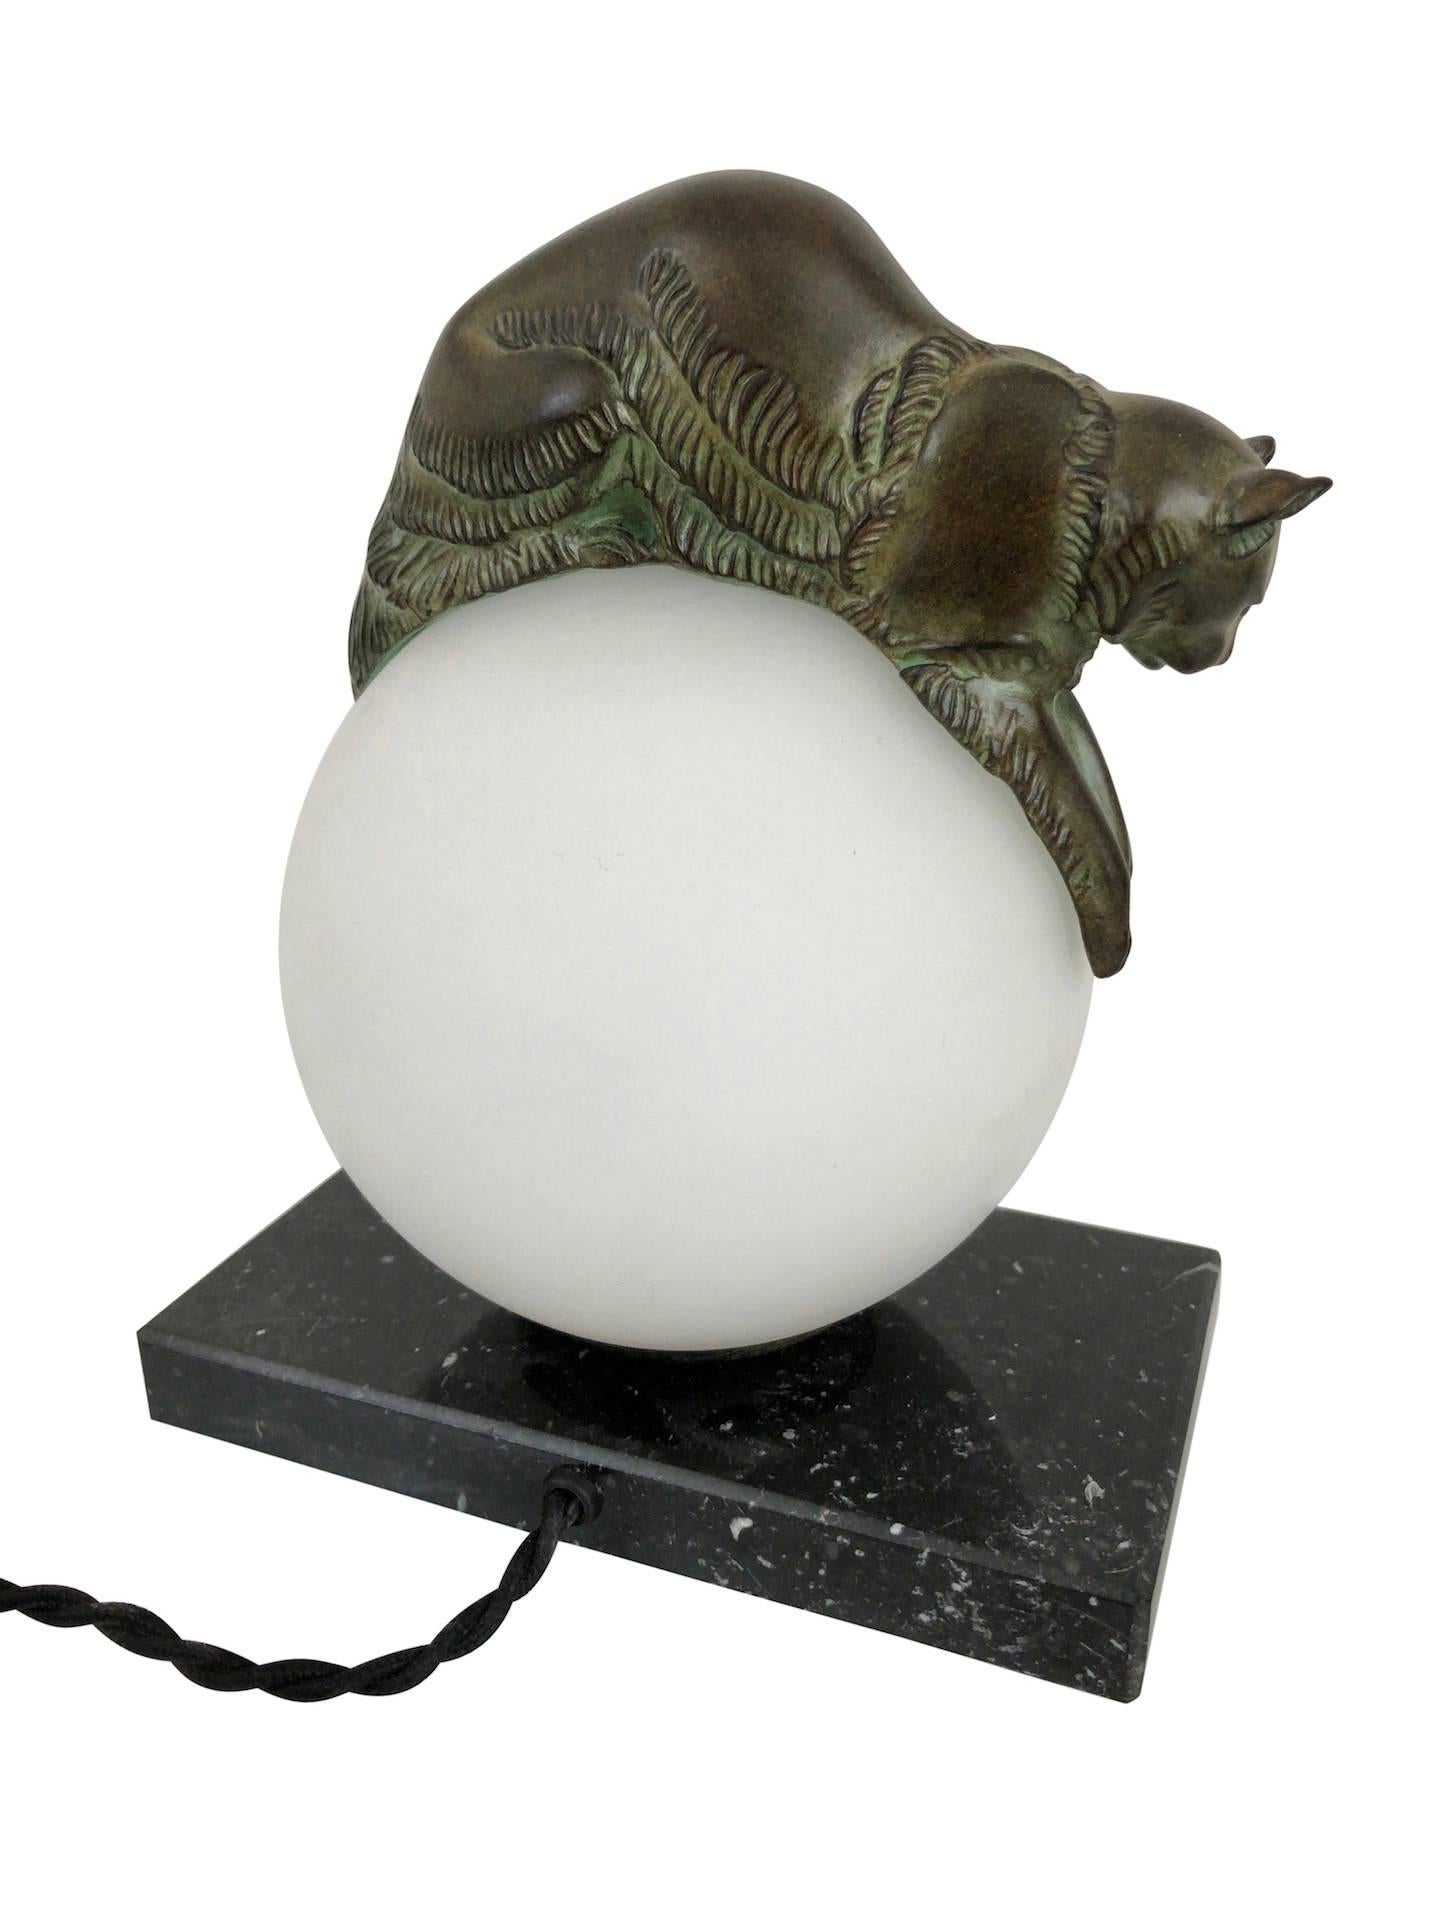 Contemporary Table Lamp, Equilibre, Cat on Glass Ball, by Gaillard, Original Max Le Verrier